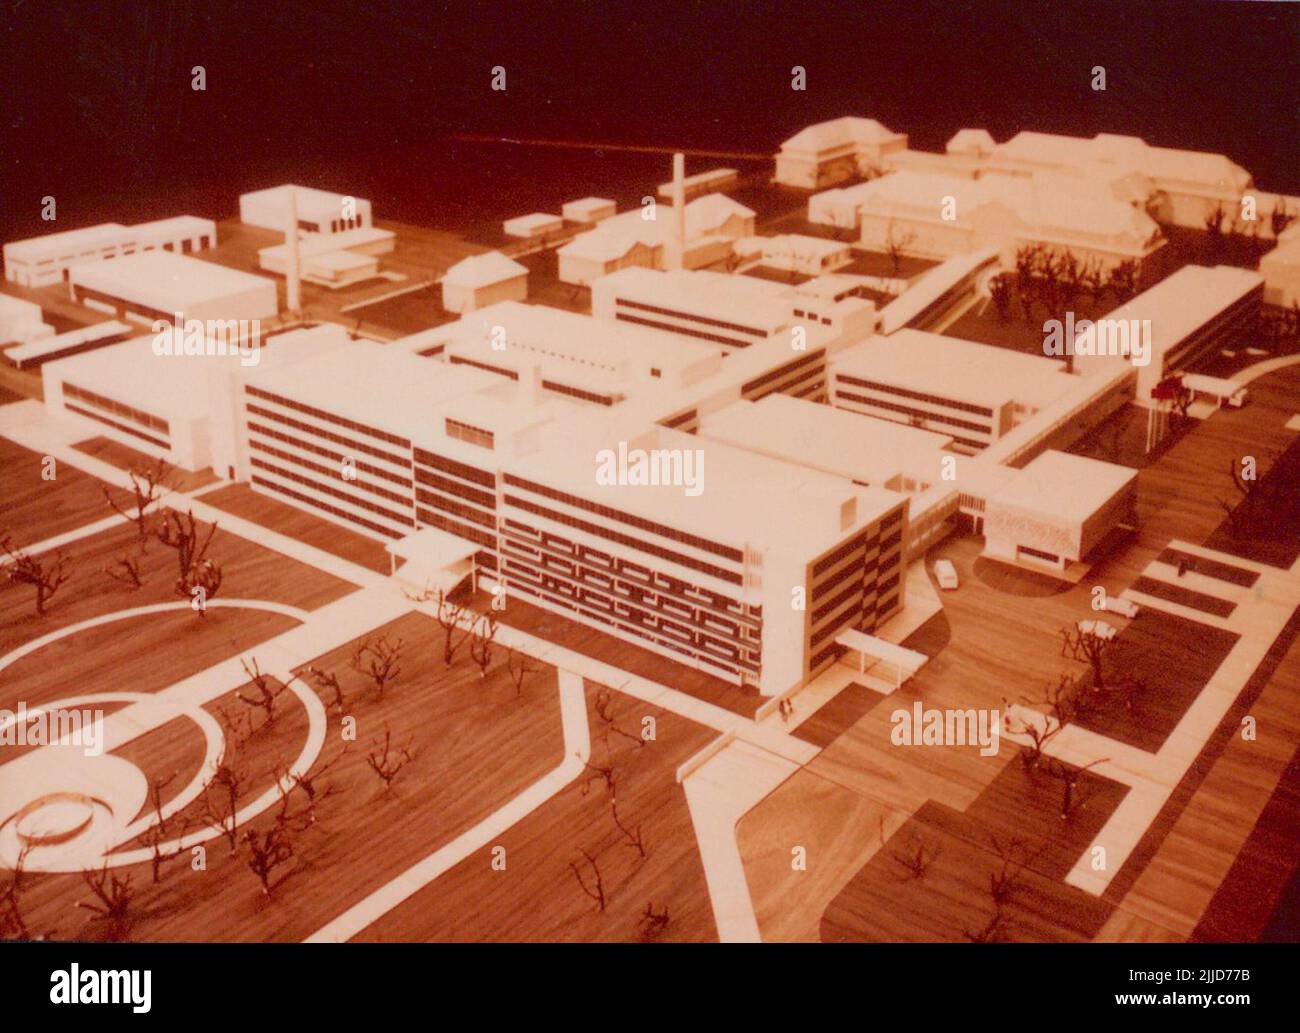 Hospital models. Hospital models of Berlin and Cottbus. Kistelegdi Collection István Kistelegdi, the Ybl-prize winner architect and professor emeritus of the Faculty of Engineering and Information Technology of the University of Pécs, donated his photo collection, which was made during his scholarly activities, to Csorba Gyz Könyvtár Library’s the Local History Collection of Csorba Gyz Könyvtár Library. Kistelegdi prepared the 3037 digitalized photos between 1972 and 1988 as an architectural designer of BARANYATERV and later PÉCSITERV. The collection partly covers the state constructions imple Stock Photo